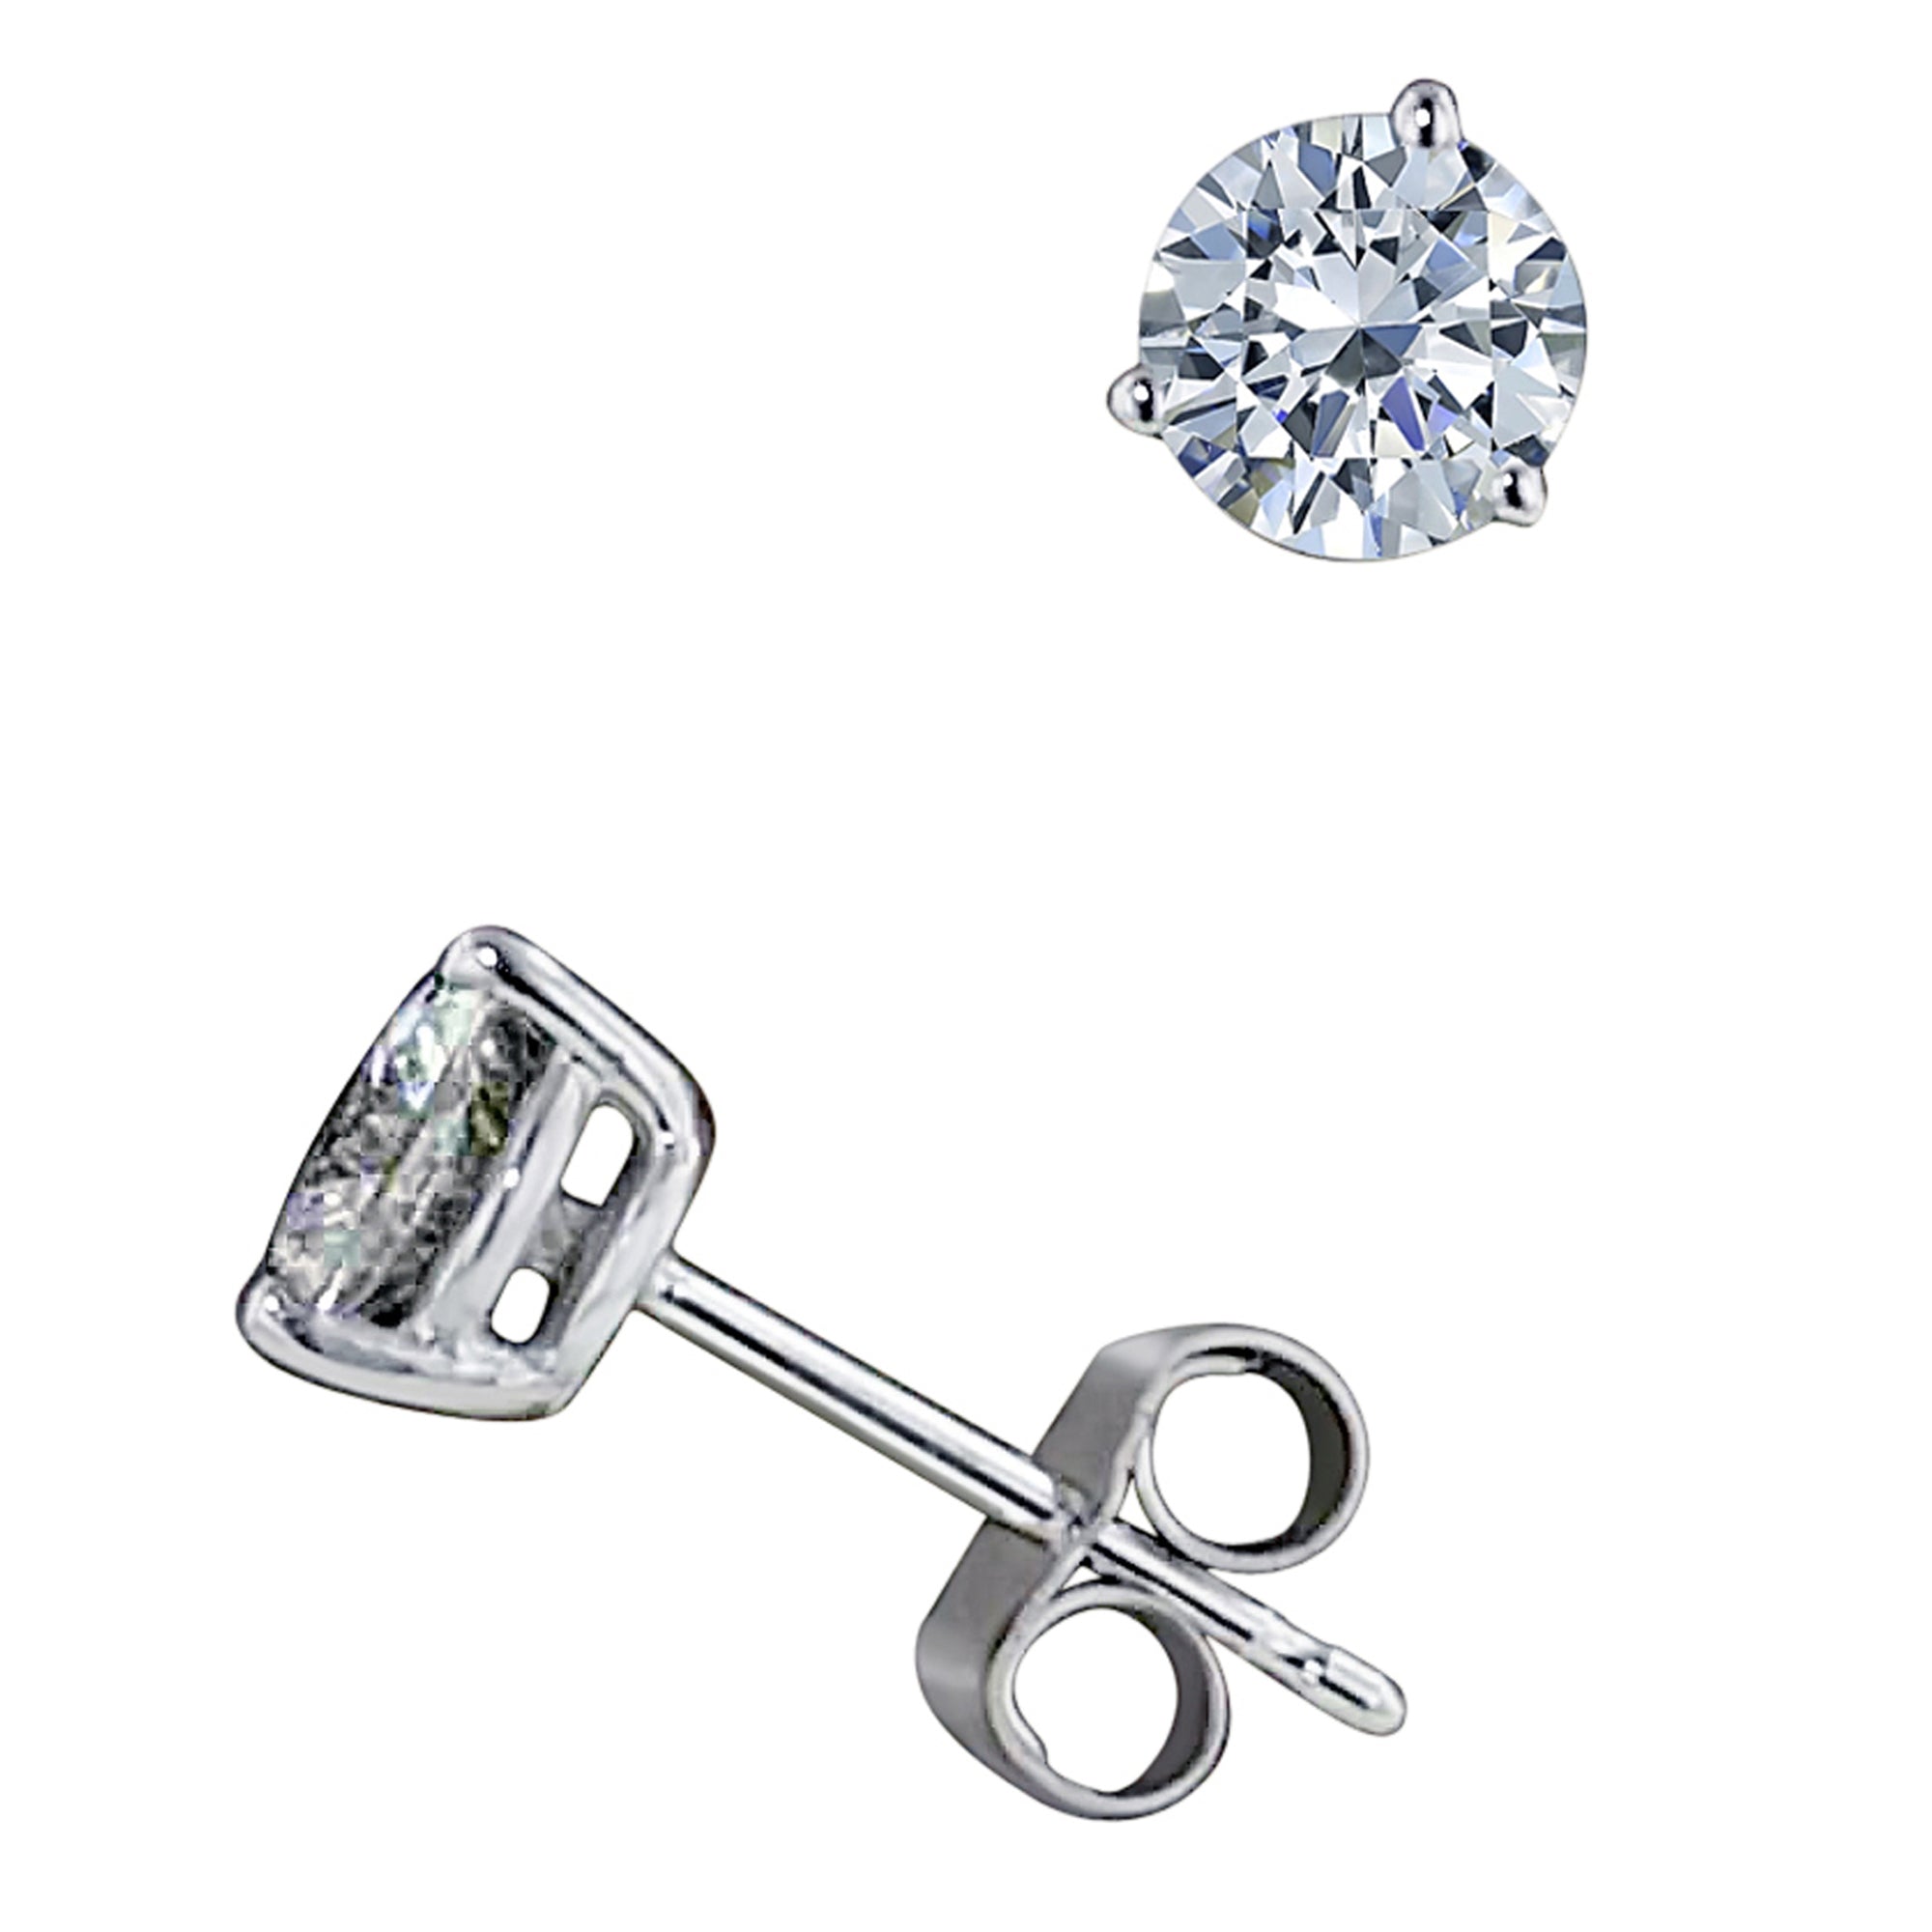 Northern Star Diamond Stud Earrings in 14kt White Gold (3/4ct tw)